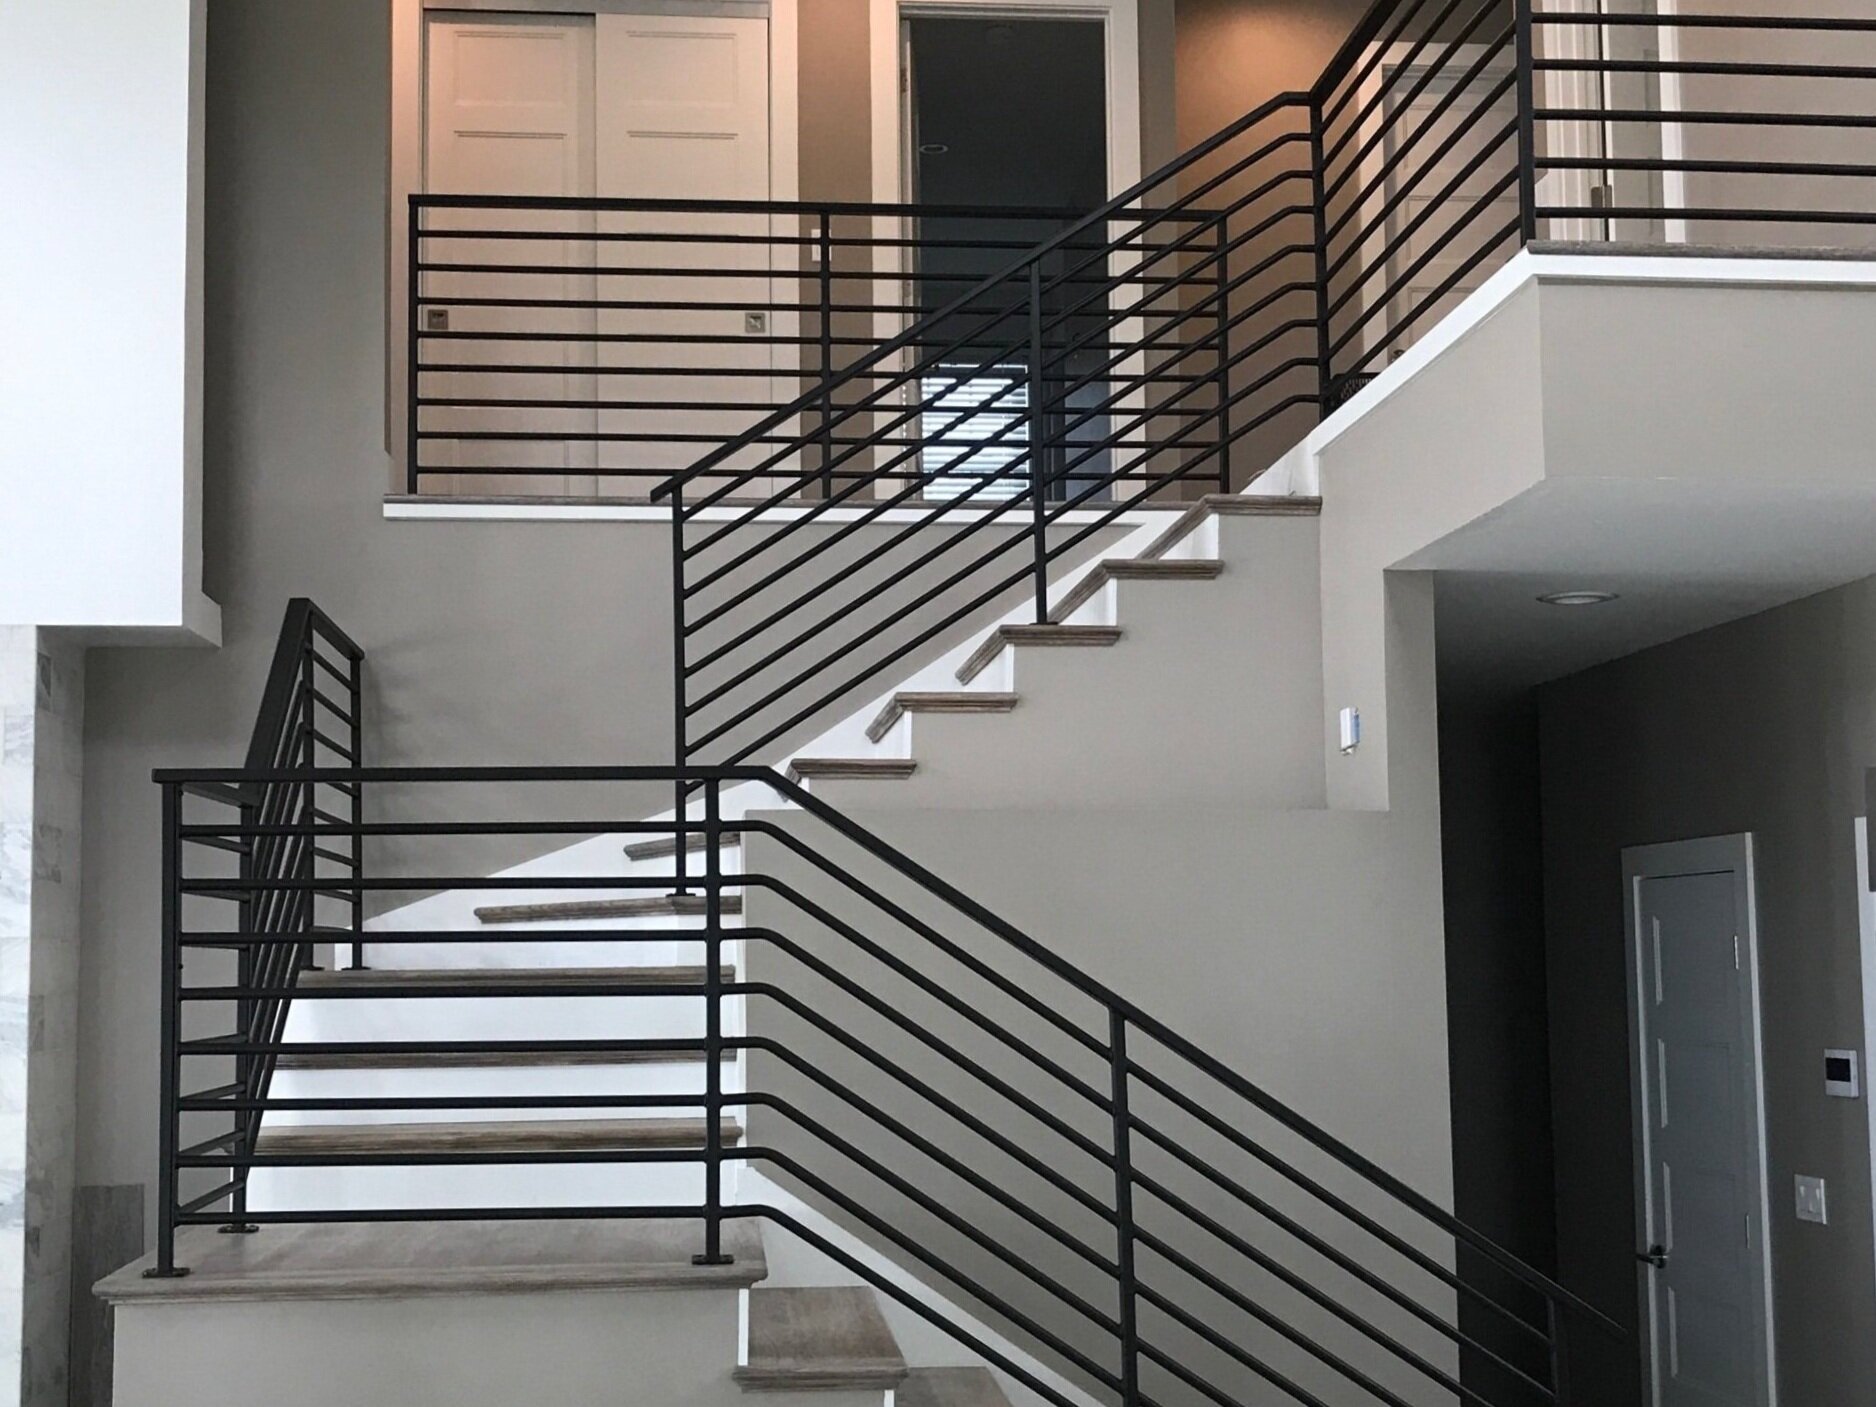 All the Details on Our Industrial Metal Stair Railing - Plank and